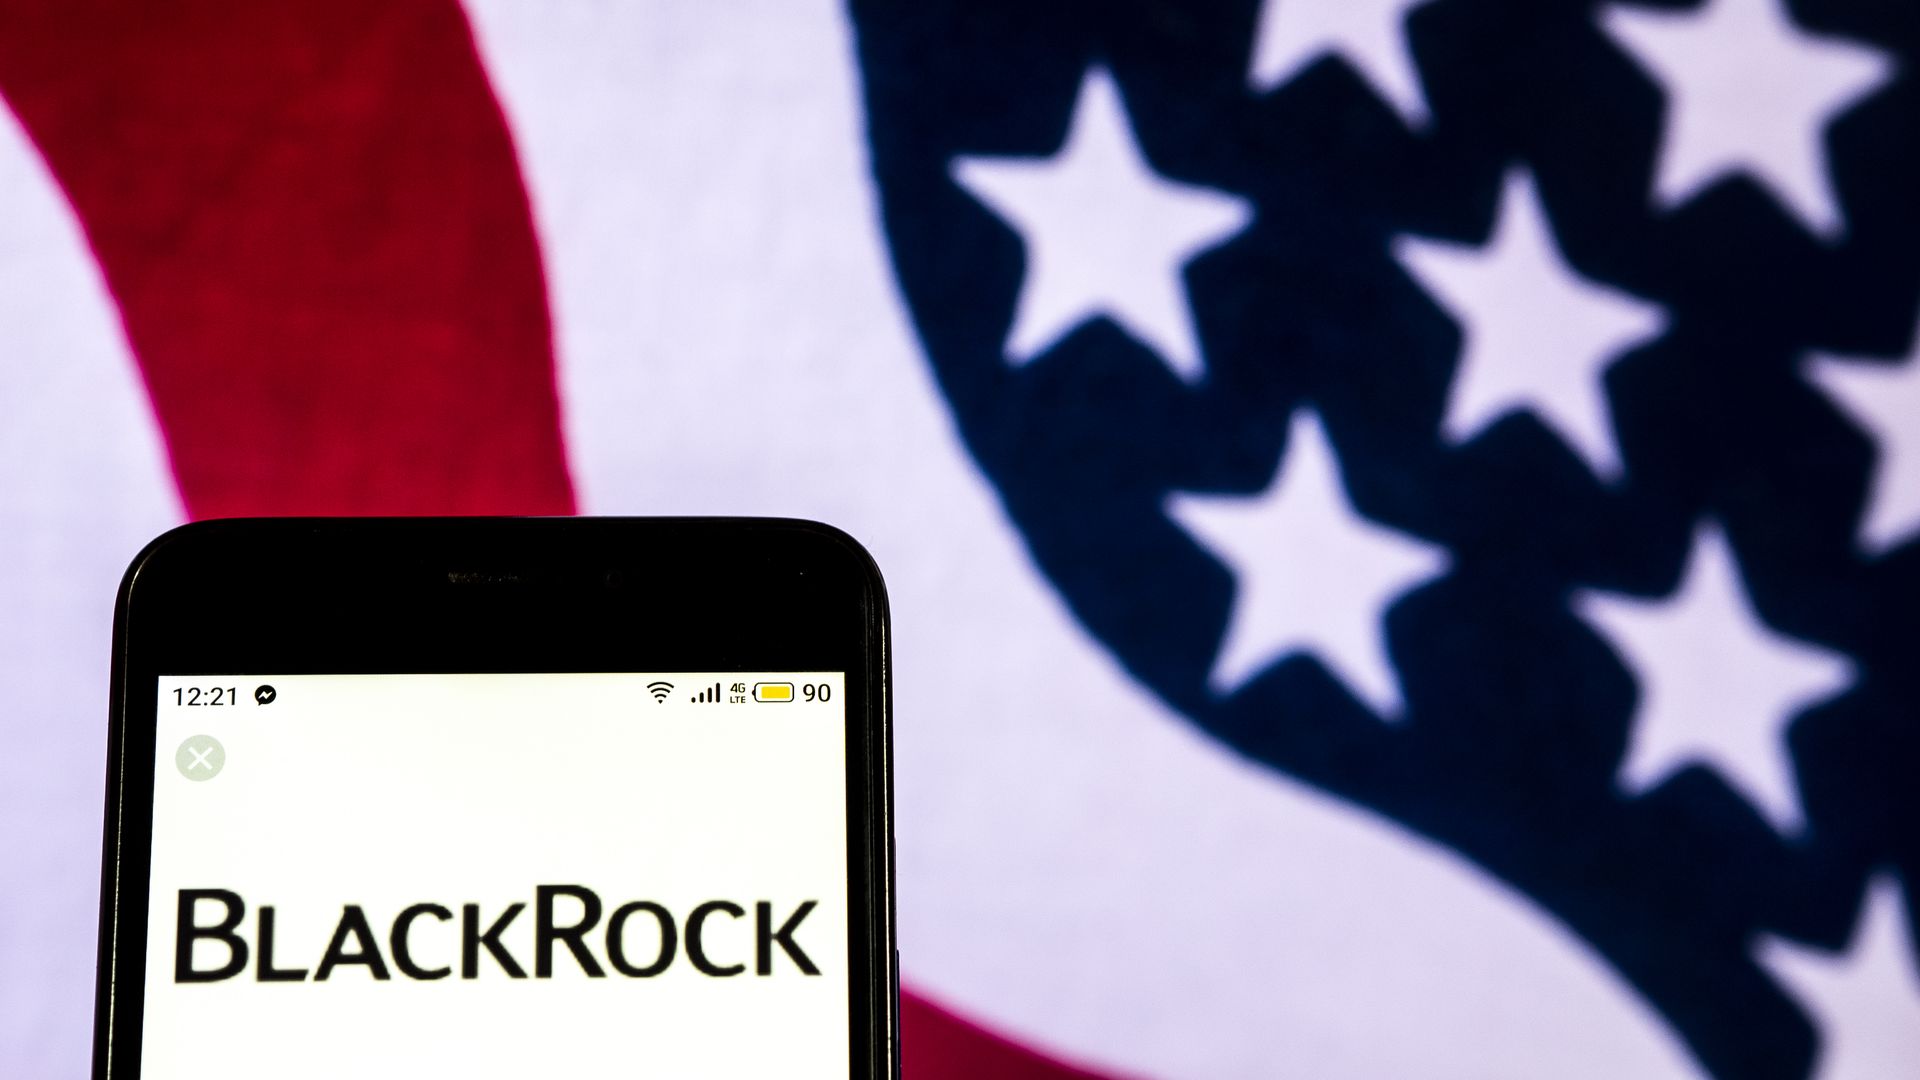 lackRock Investment management company logo seen displayed on a smart phone. 